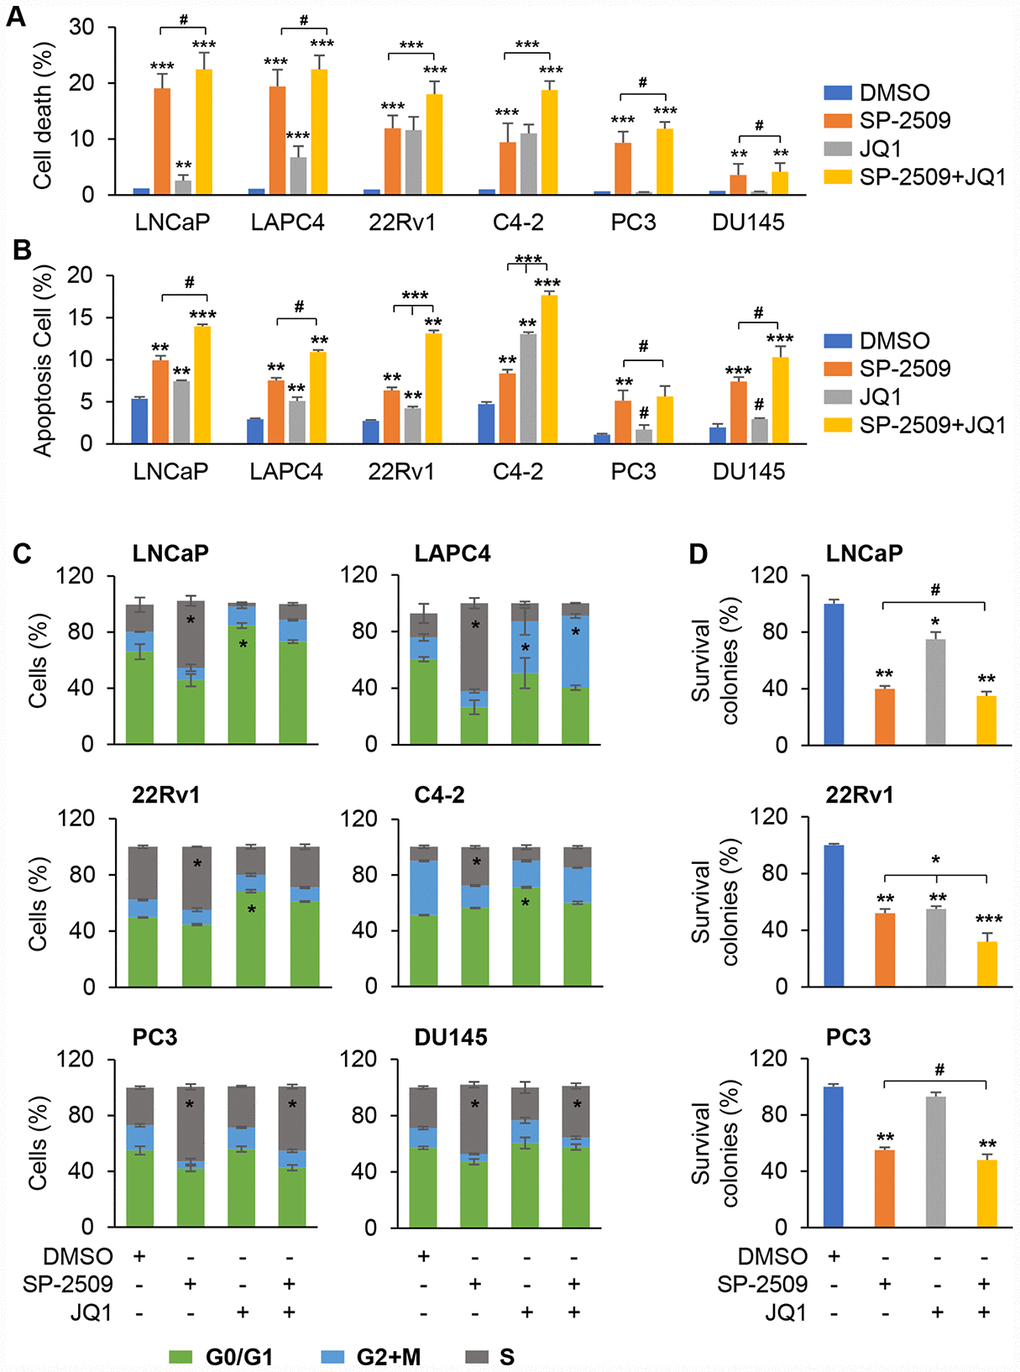 Inhibition of LSD1 induces cell apoptosis and arrests cells in S phase but inhibition of BRD4 exhibits no apoptotic effect in PC3 and DU145 cells. (A–B) Analysis of apoptosis in LNCaP, LAPC4, 22Rv1, C4-2, PC3 and DU145 cells after 72 h treatment with 1 μM JQ1 or SP-2509 alone, or in combination. Cell death was assessed using propidium iodide (PI) staining (A) or Apoptosis was assessed by Annexin-V and PI staining followed by FACS analysis (B). (C) Graphic representation of cell cycle distribution for LNCaP, LAPC4, 22Rv1, C4-2, PC3 and DU145 cells after 72 h treatment with 1 μM JQ1 or SP-2509 alone, or in combination. Duration of each cell cycle stage was assessed using PI staining followed by FACS analysis. (D) Colony formation for cells after 72 h treatment with 1 μM JQ1 or SP-2509 alone, or in combination. Graphic data are the means ± SD of four replicate experiments. Statistical significance are determined by ANOVA with: * indicates P 